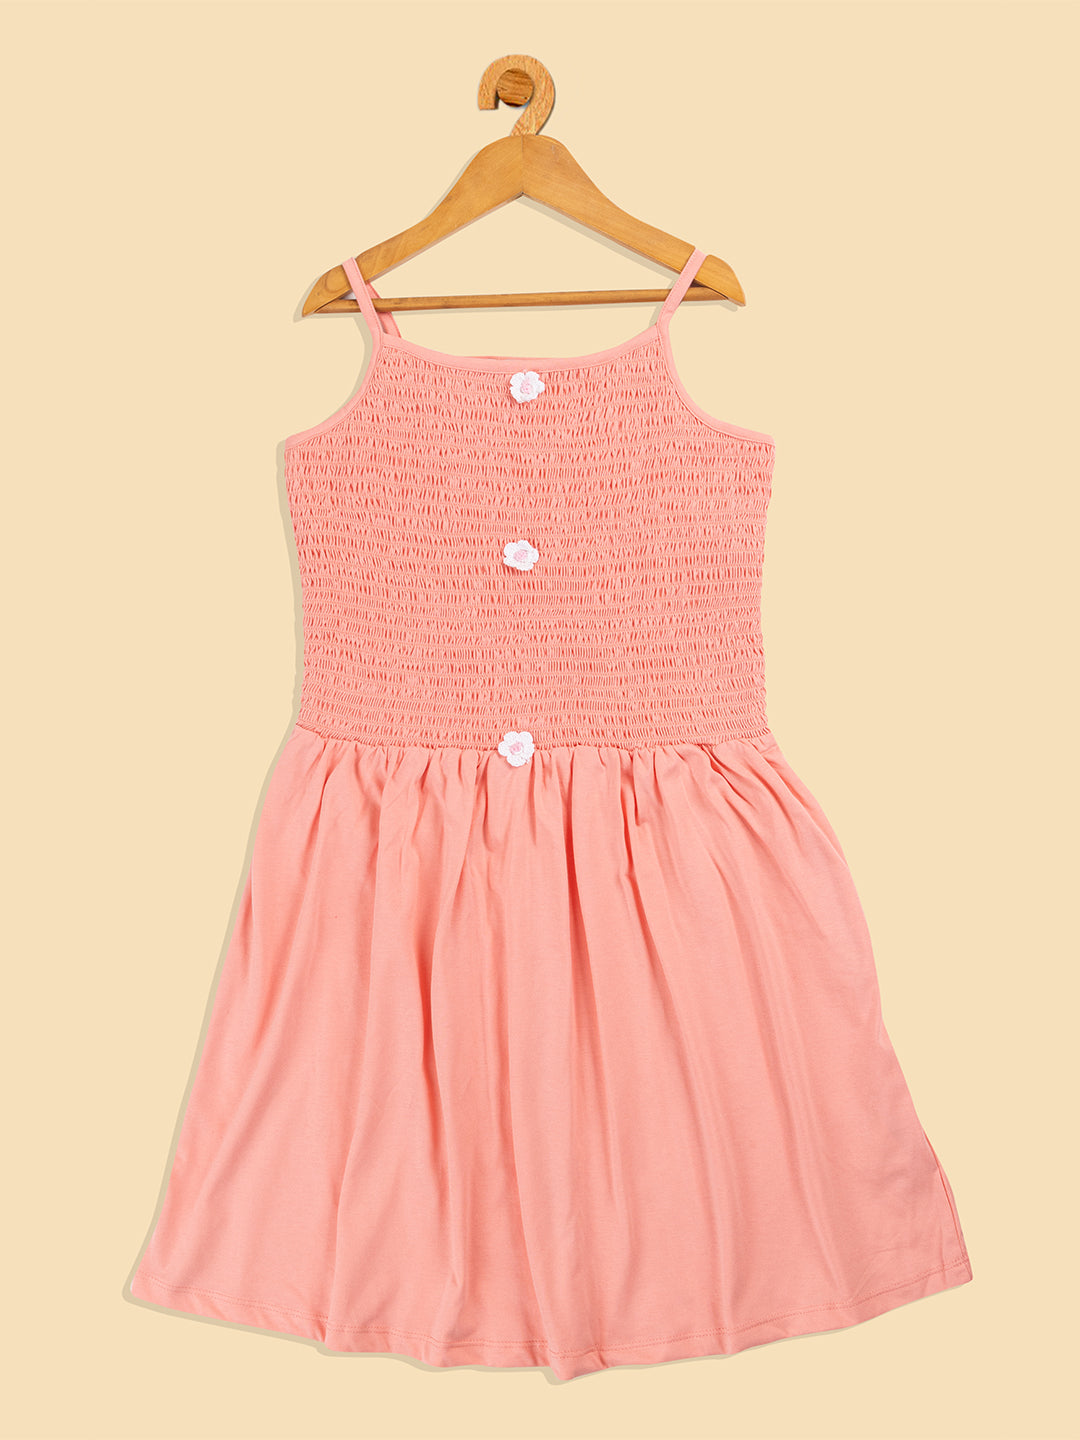 Pampolina  Solid Summer Cotton Dress For Baby Girl-Peach